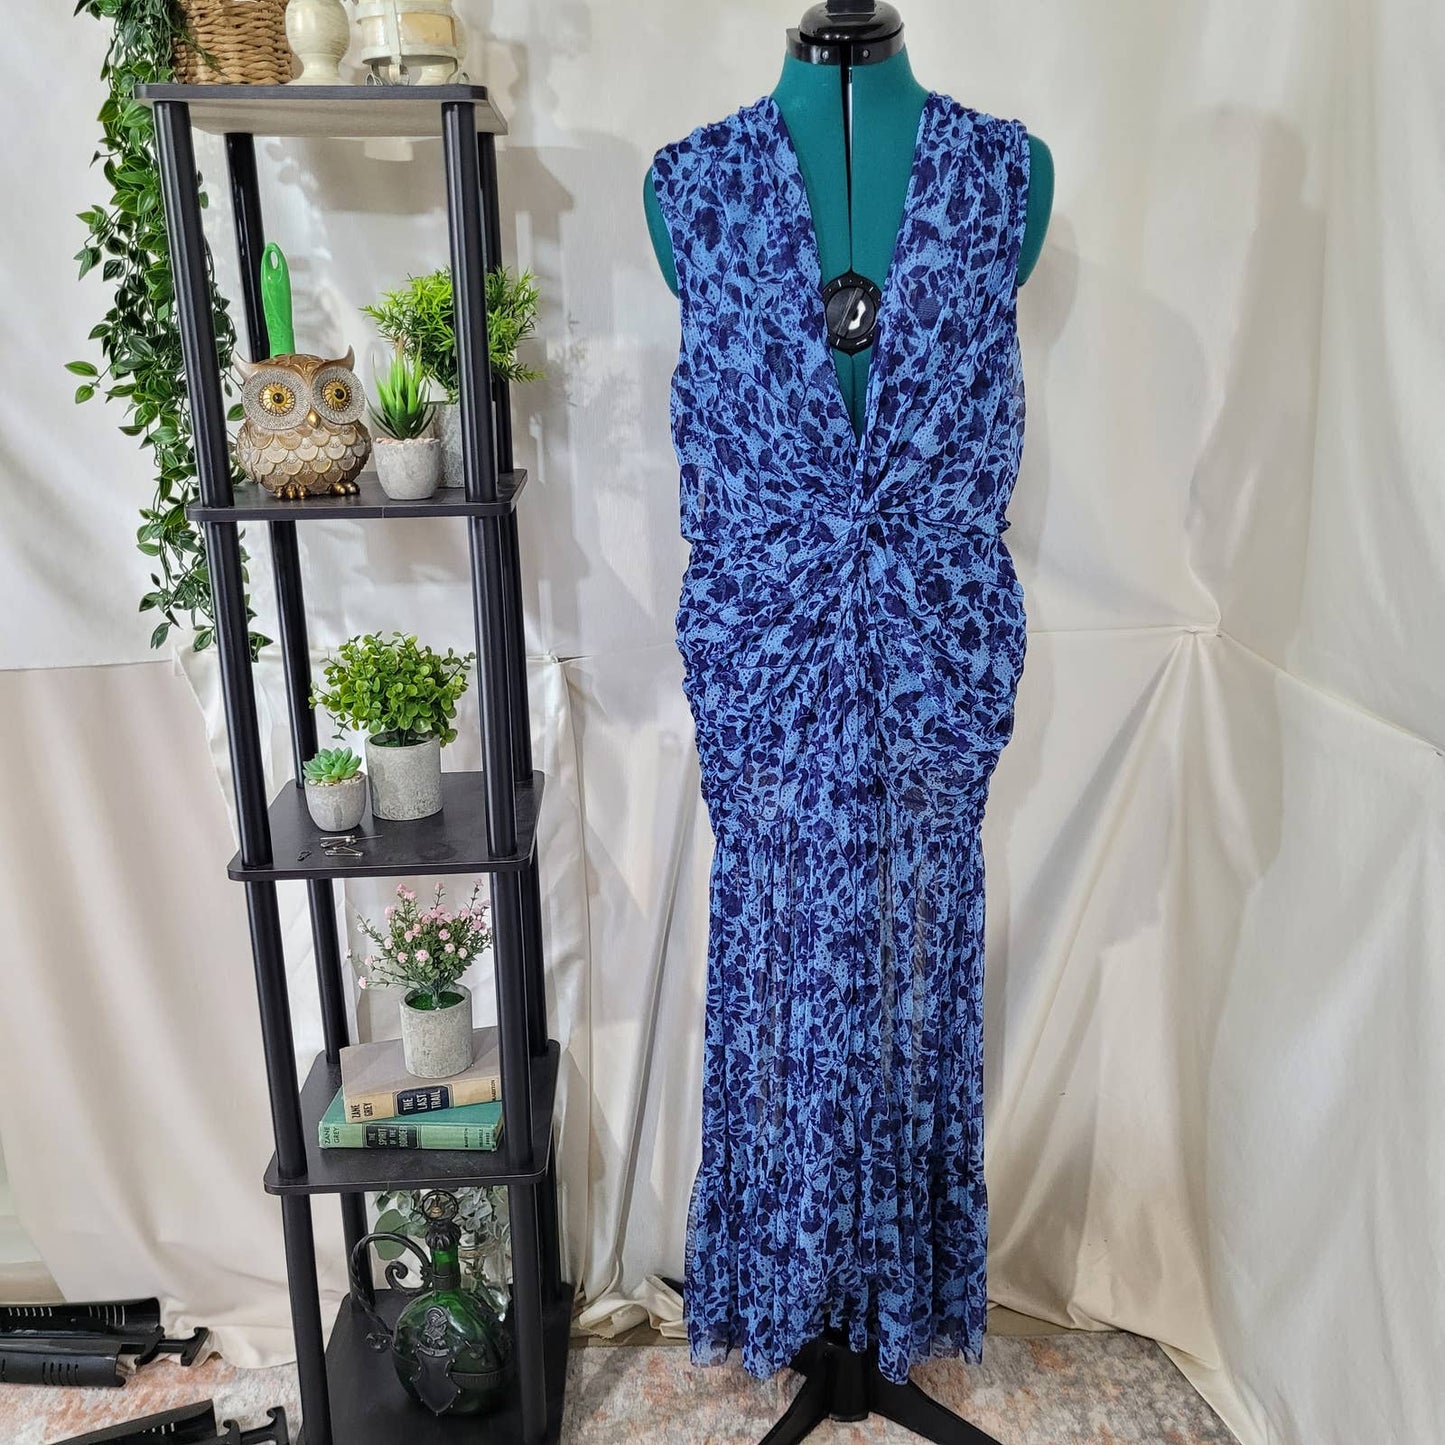 Misa Los Angeles Ava Blue Dress in Goa Floral Mesh - Size Large